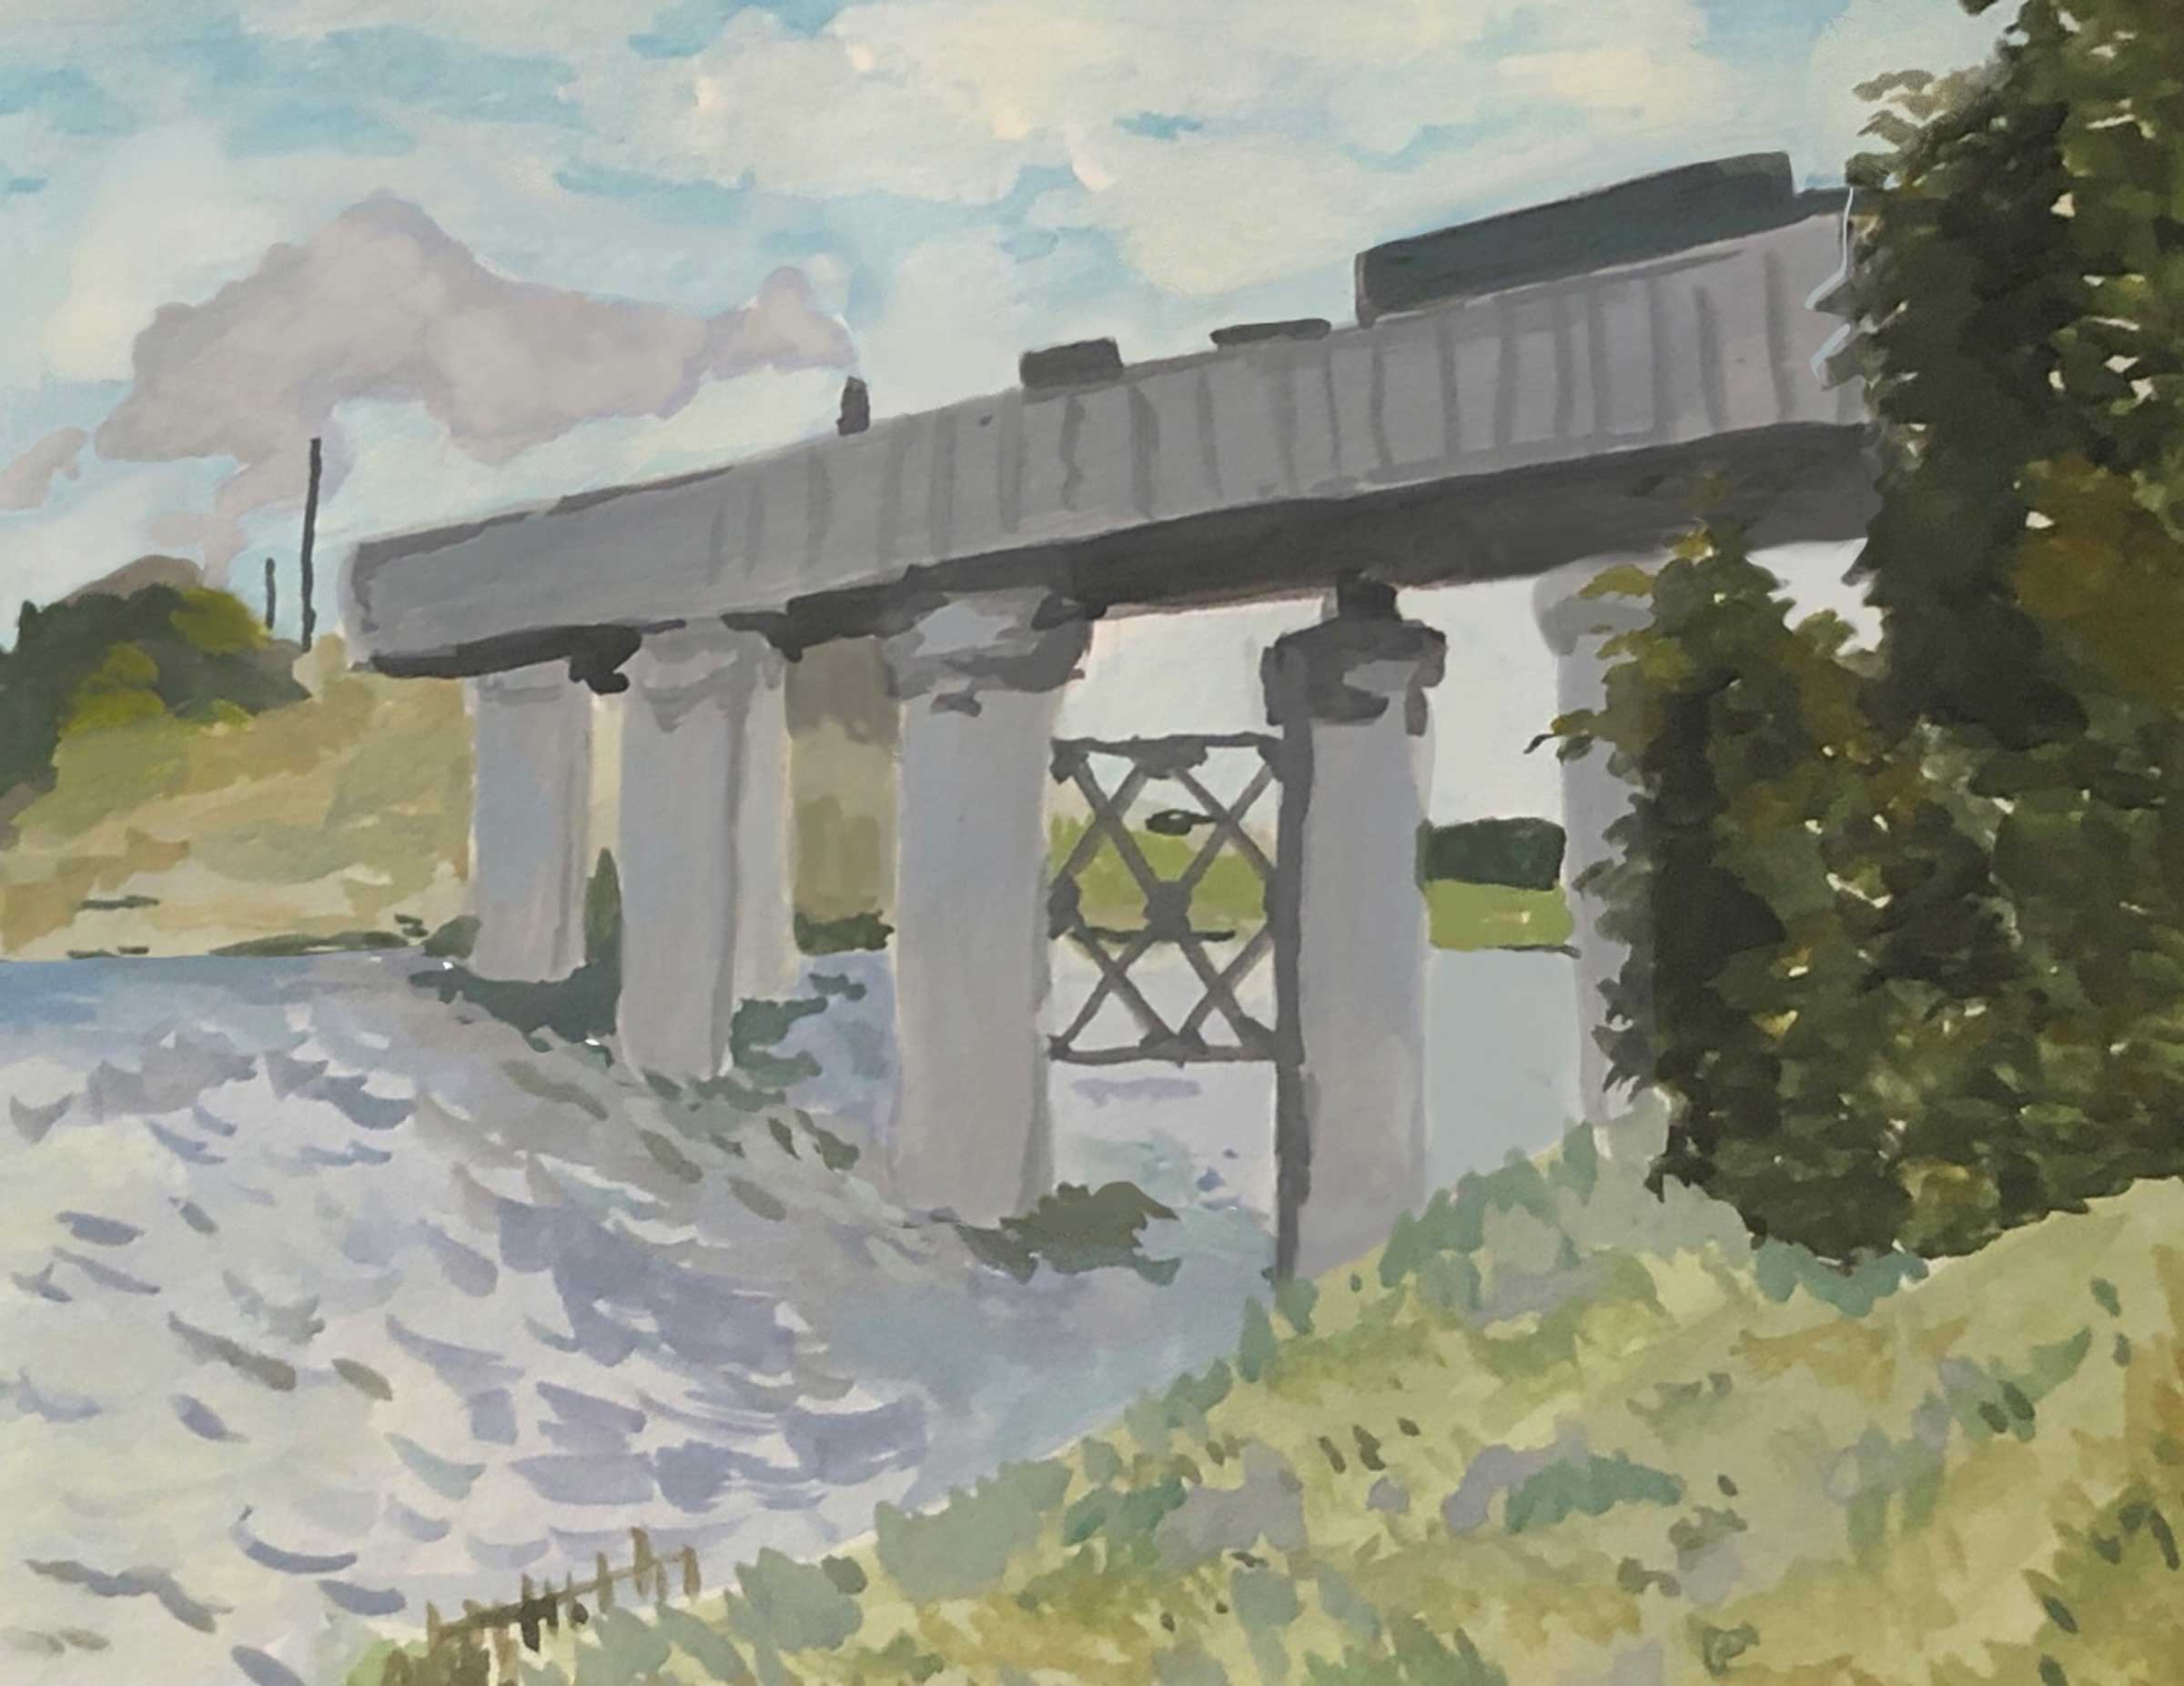 A painting of a train on a bridge over a river.